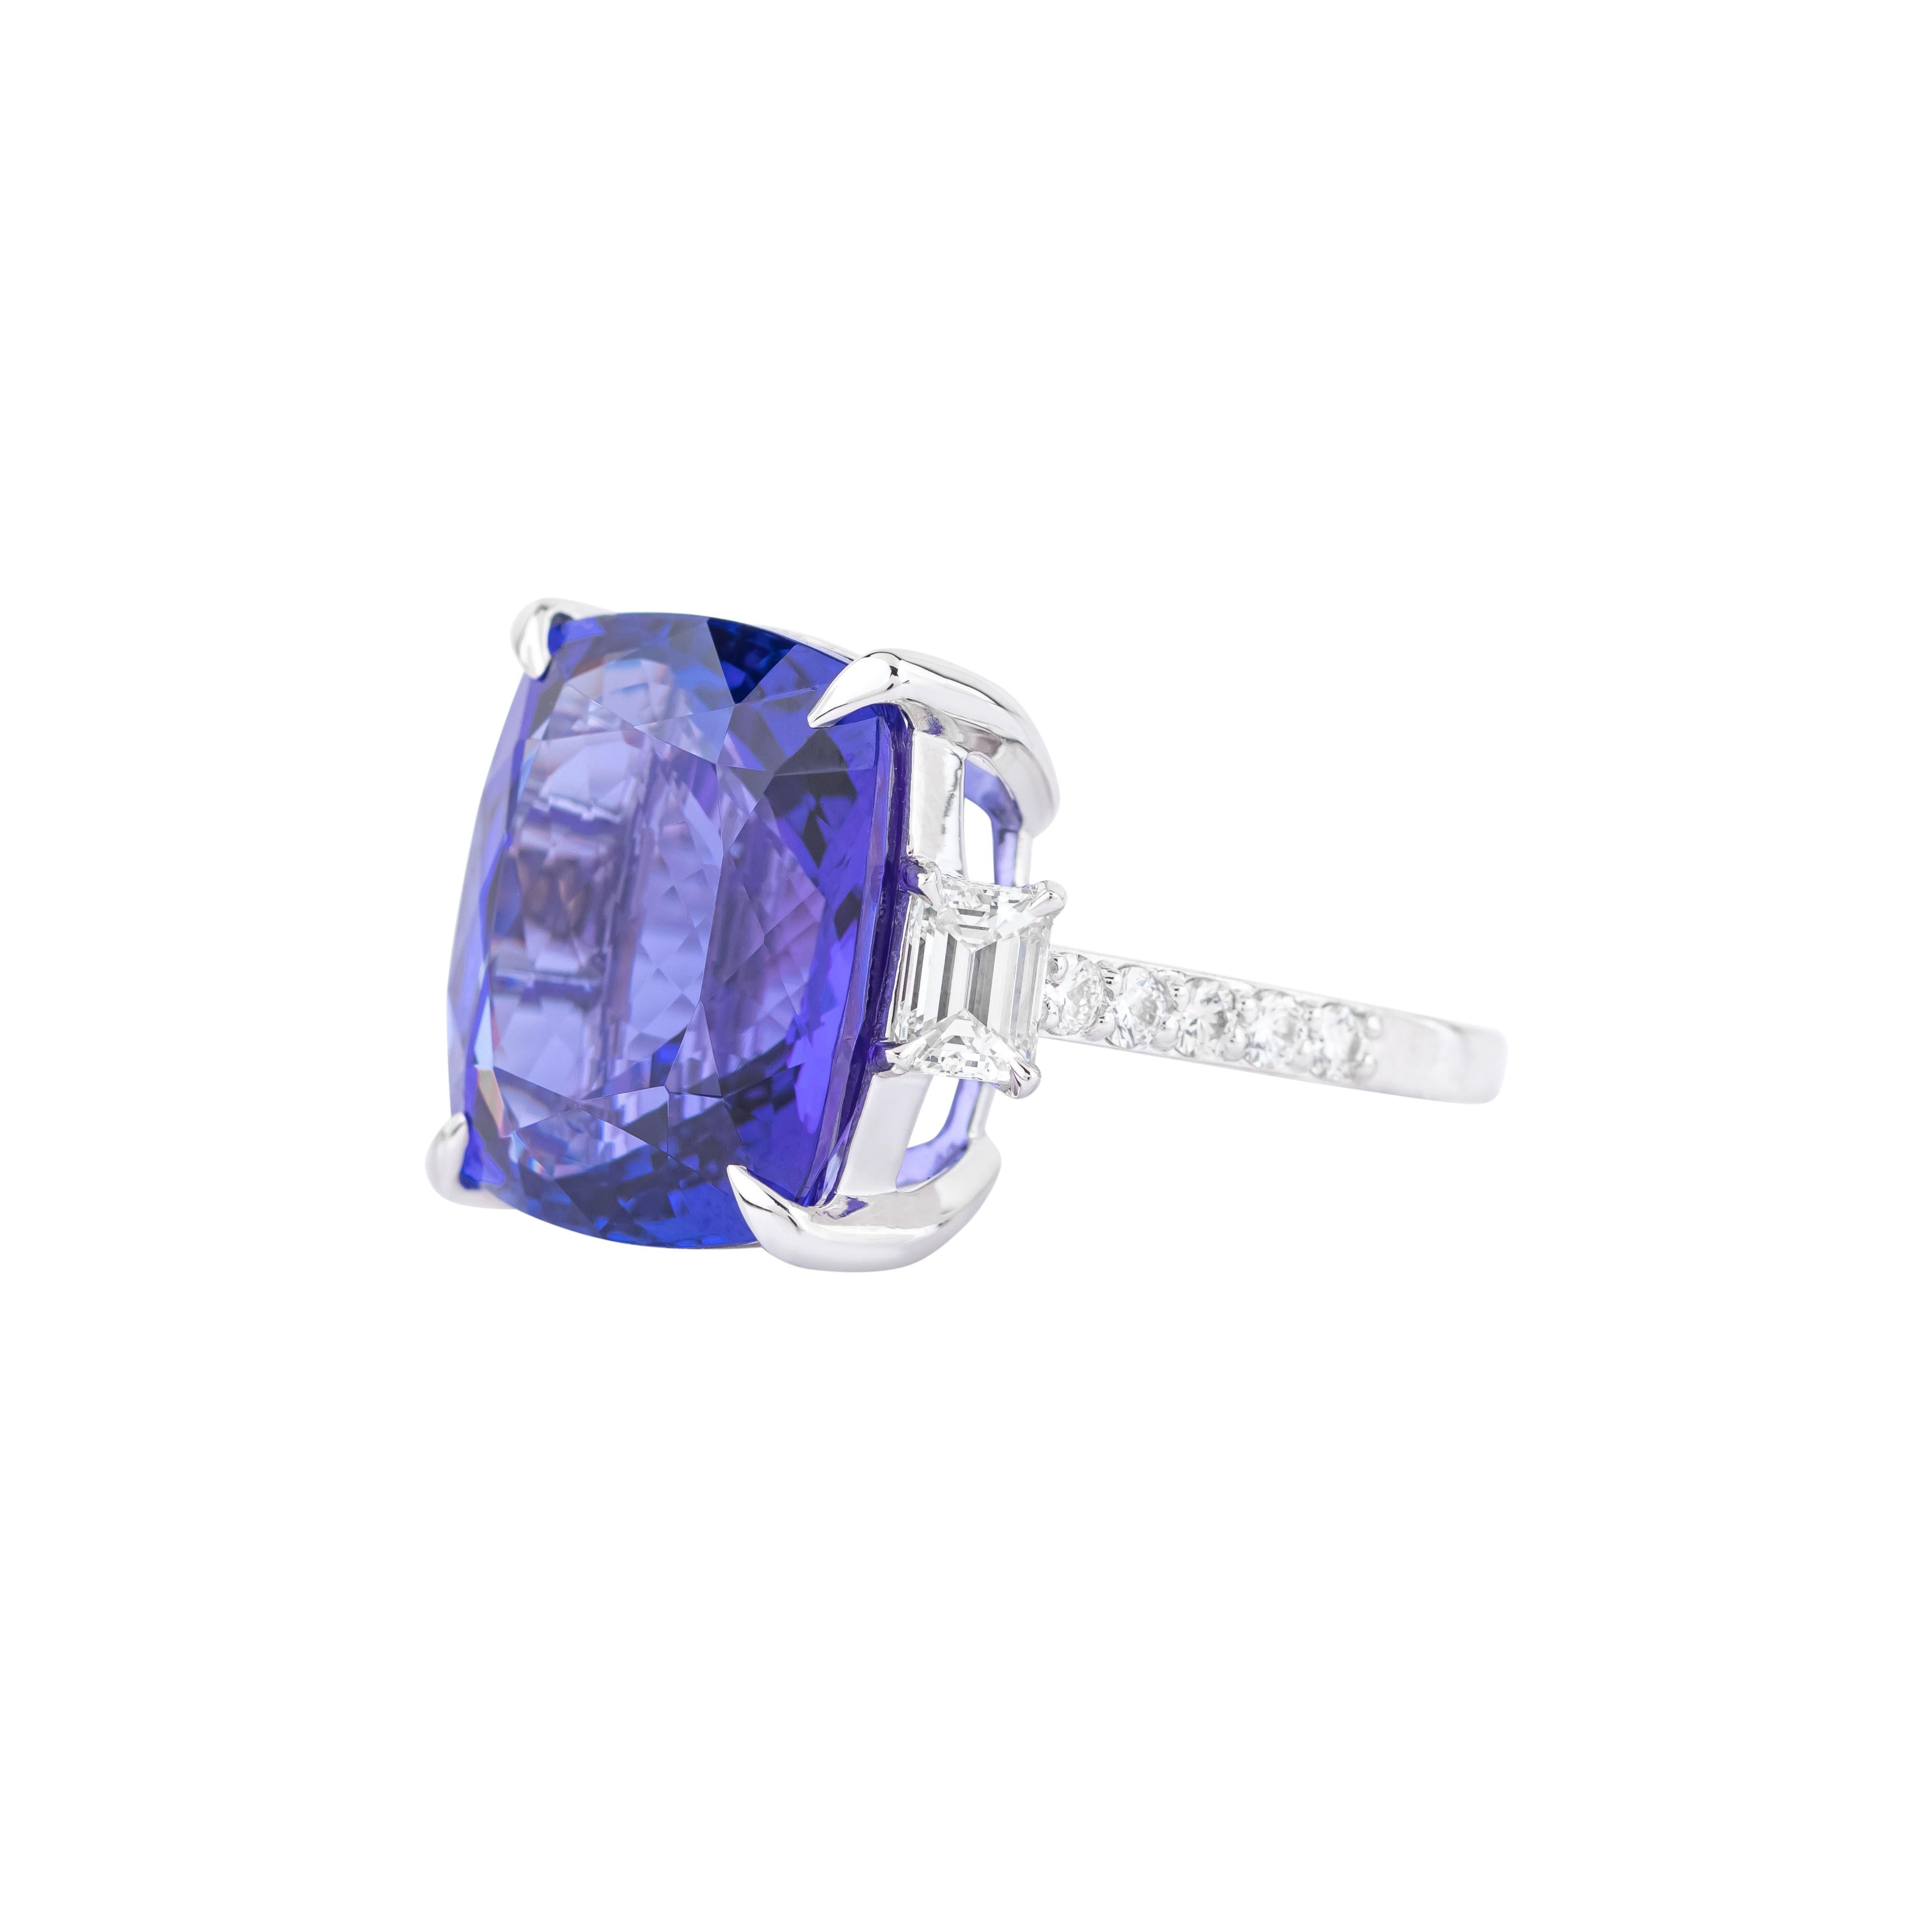 Step into a world of unparalleled luxury with our 18 Karat Gold 18.85 Carat Diamond and Tanzanite Solitaire Ring – a magnificent creation that exudes opulence and sophistication. Each ring is meticulously crafted and curated to showcase the perfect